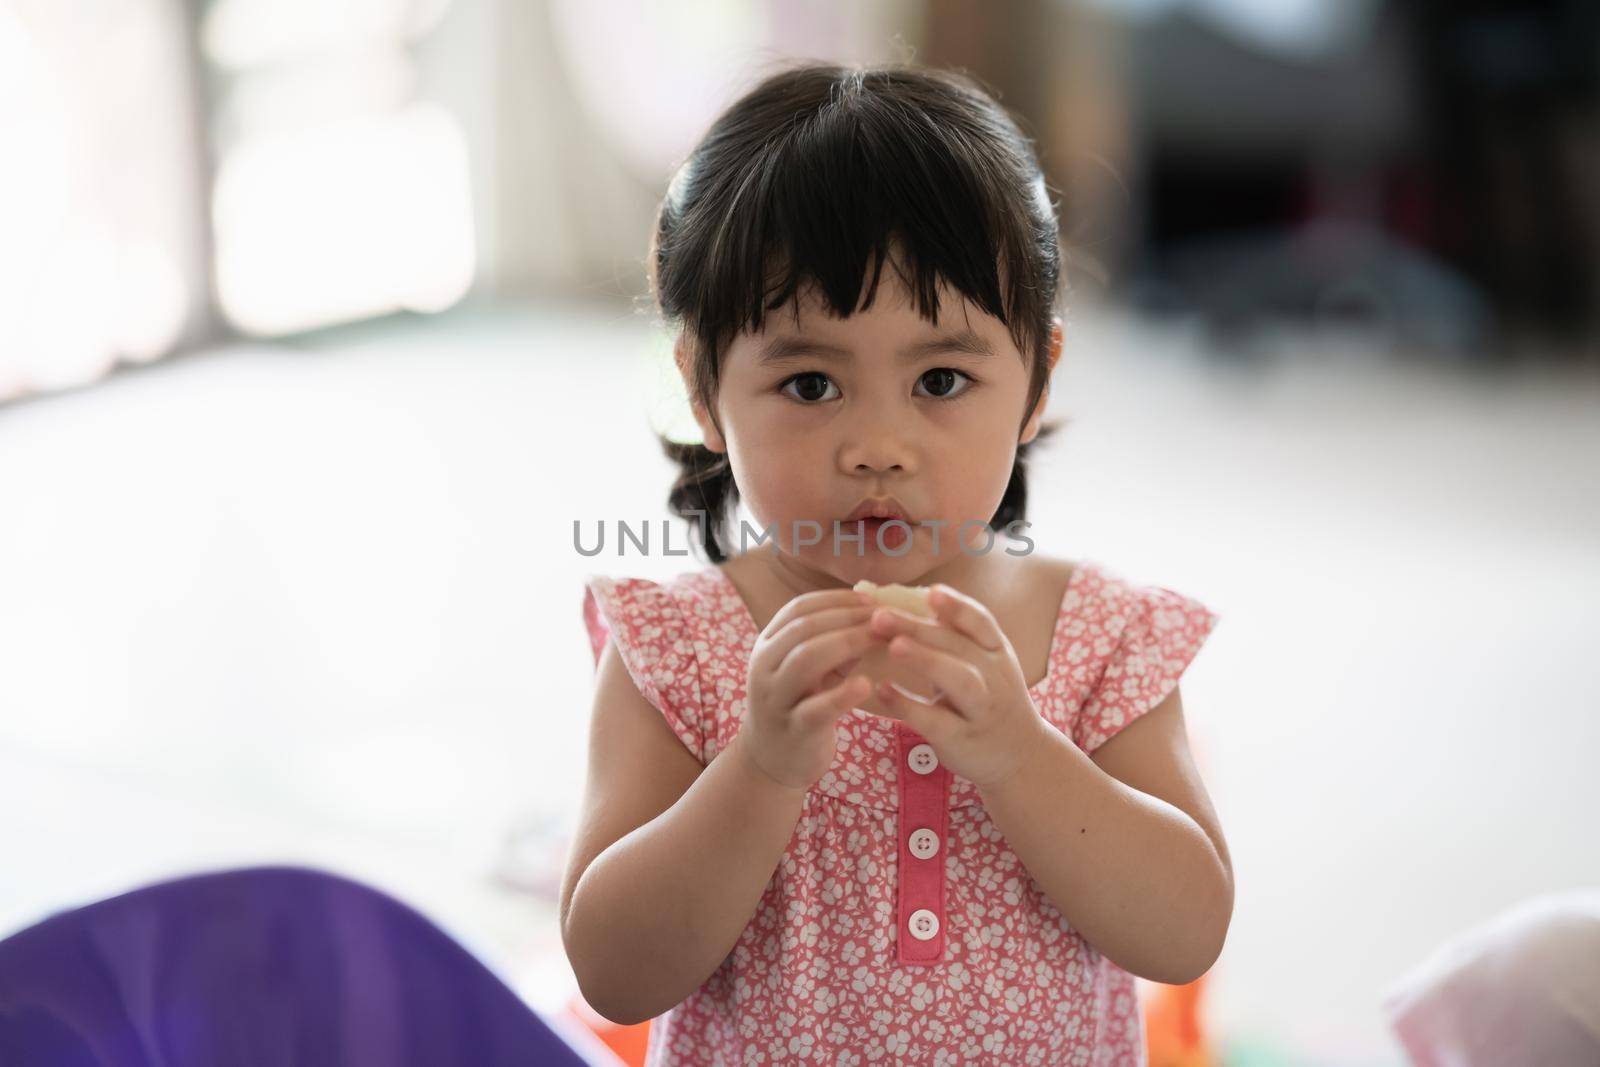 cute baby girl eating cookies in the house